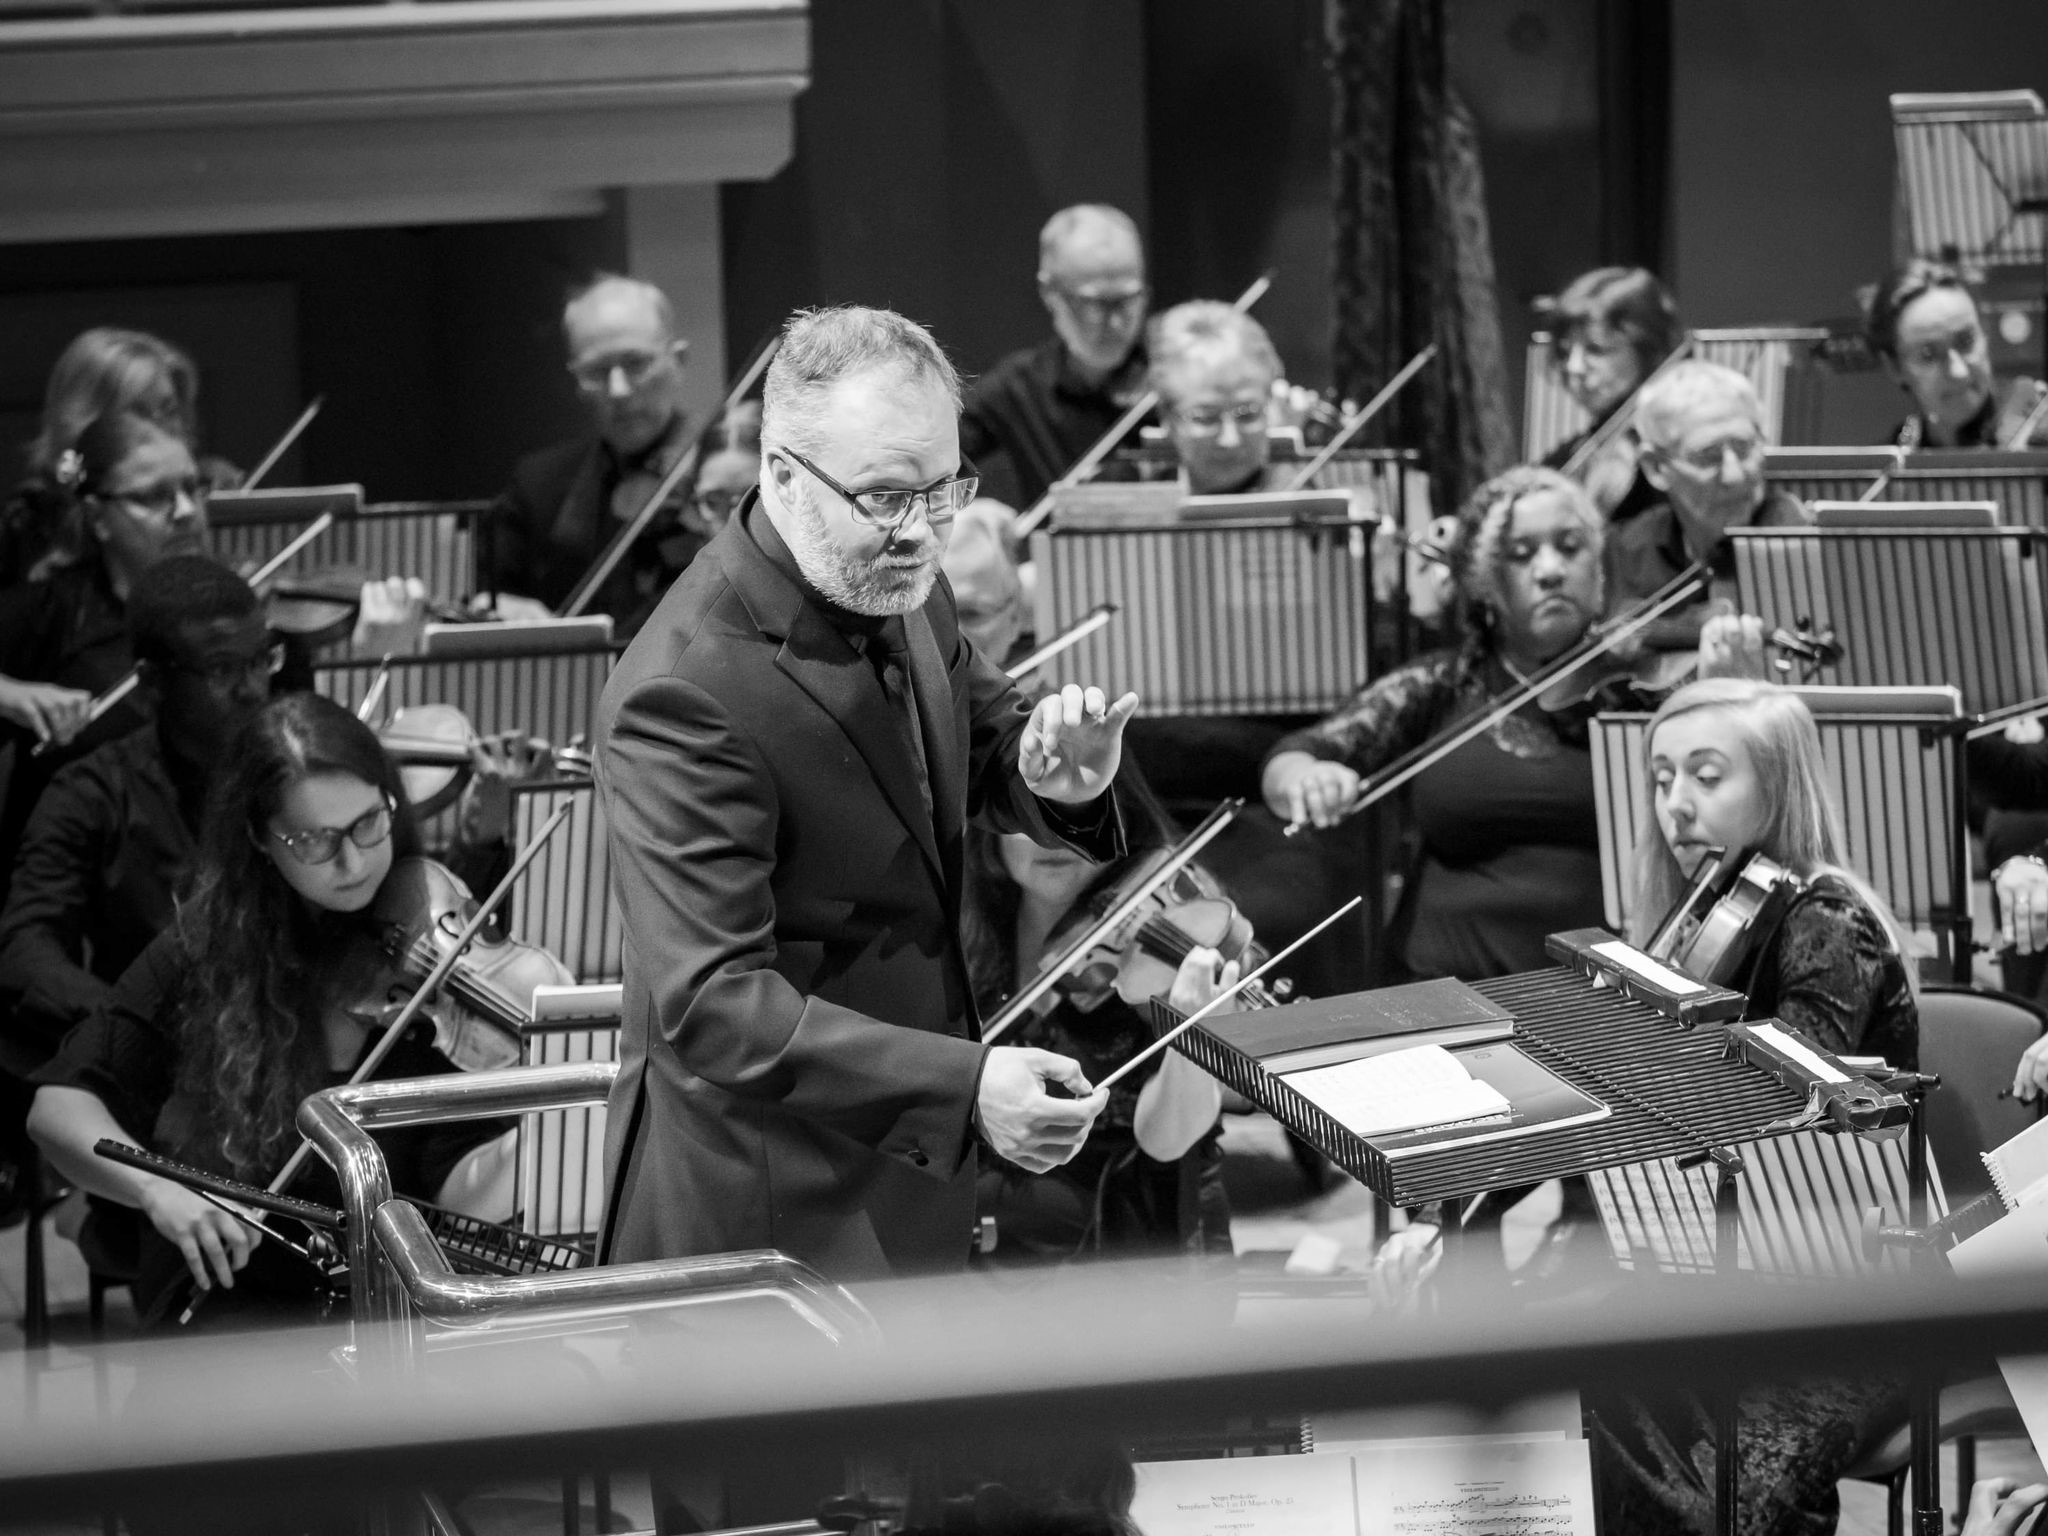 Saturday 1 June at 1:30pm - Discovering Elgar's Orchestra in Worcester Guildhall